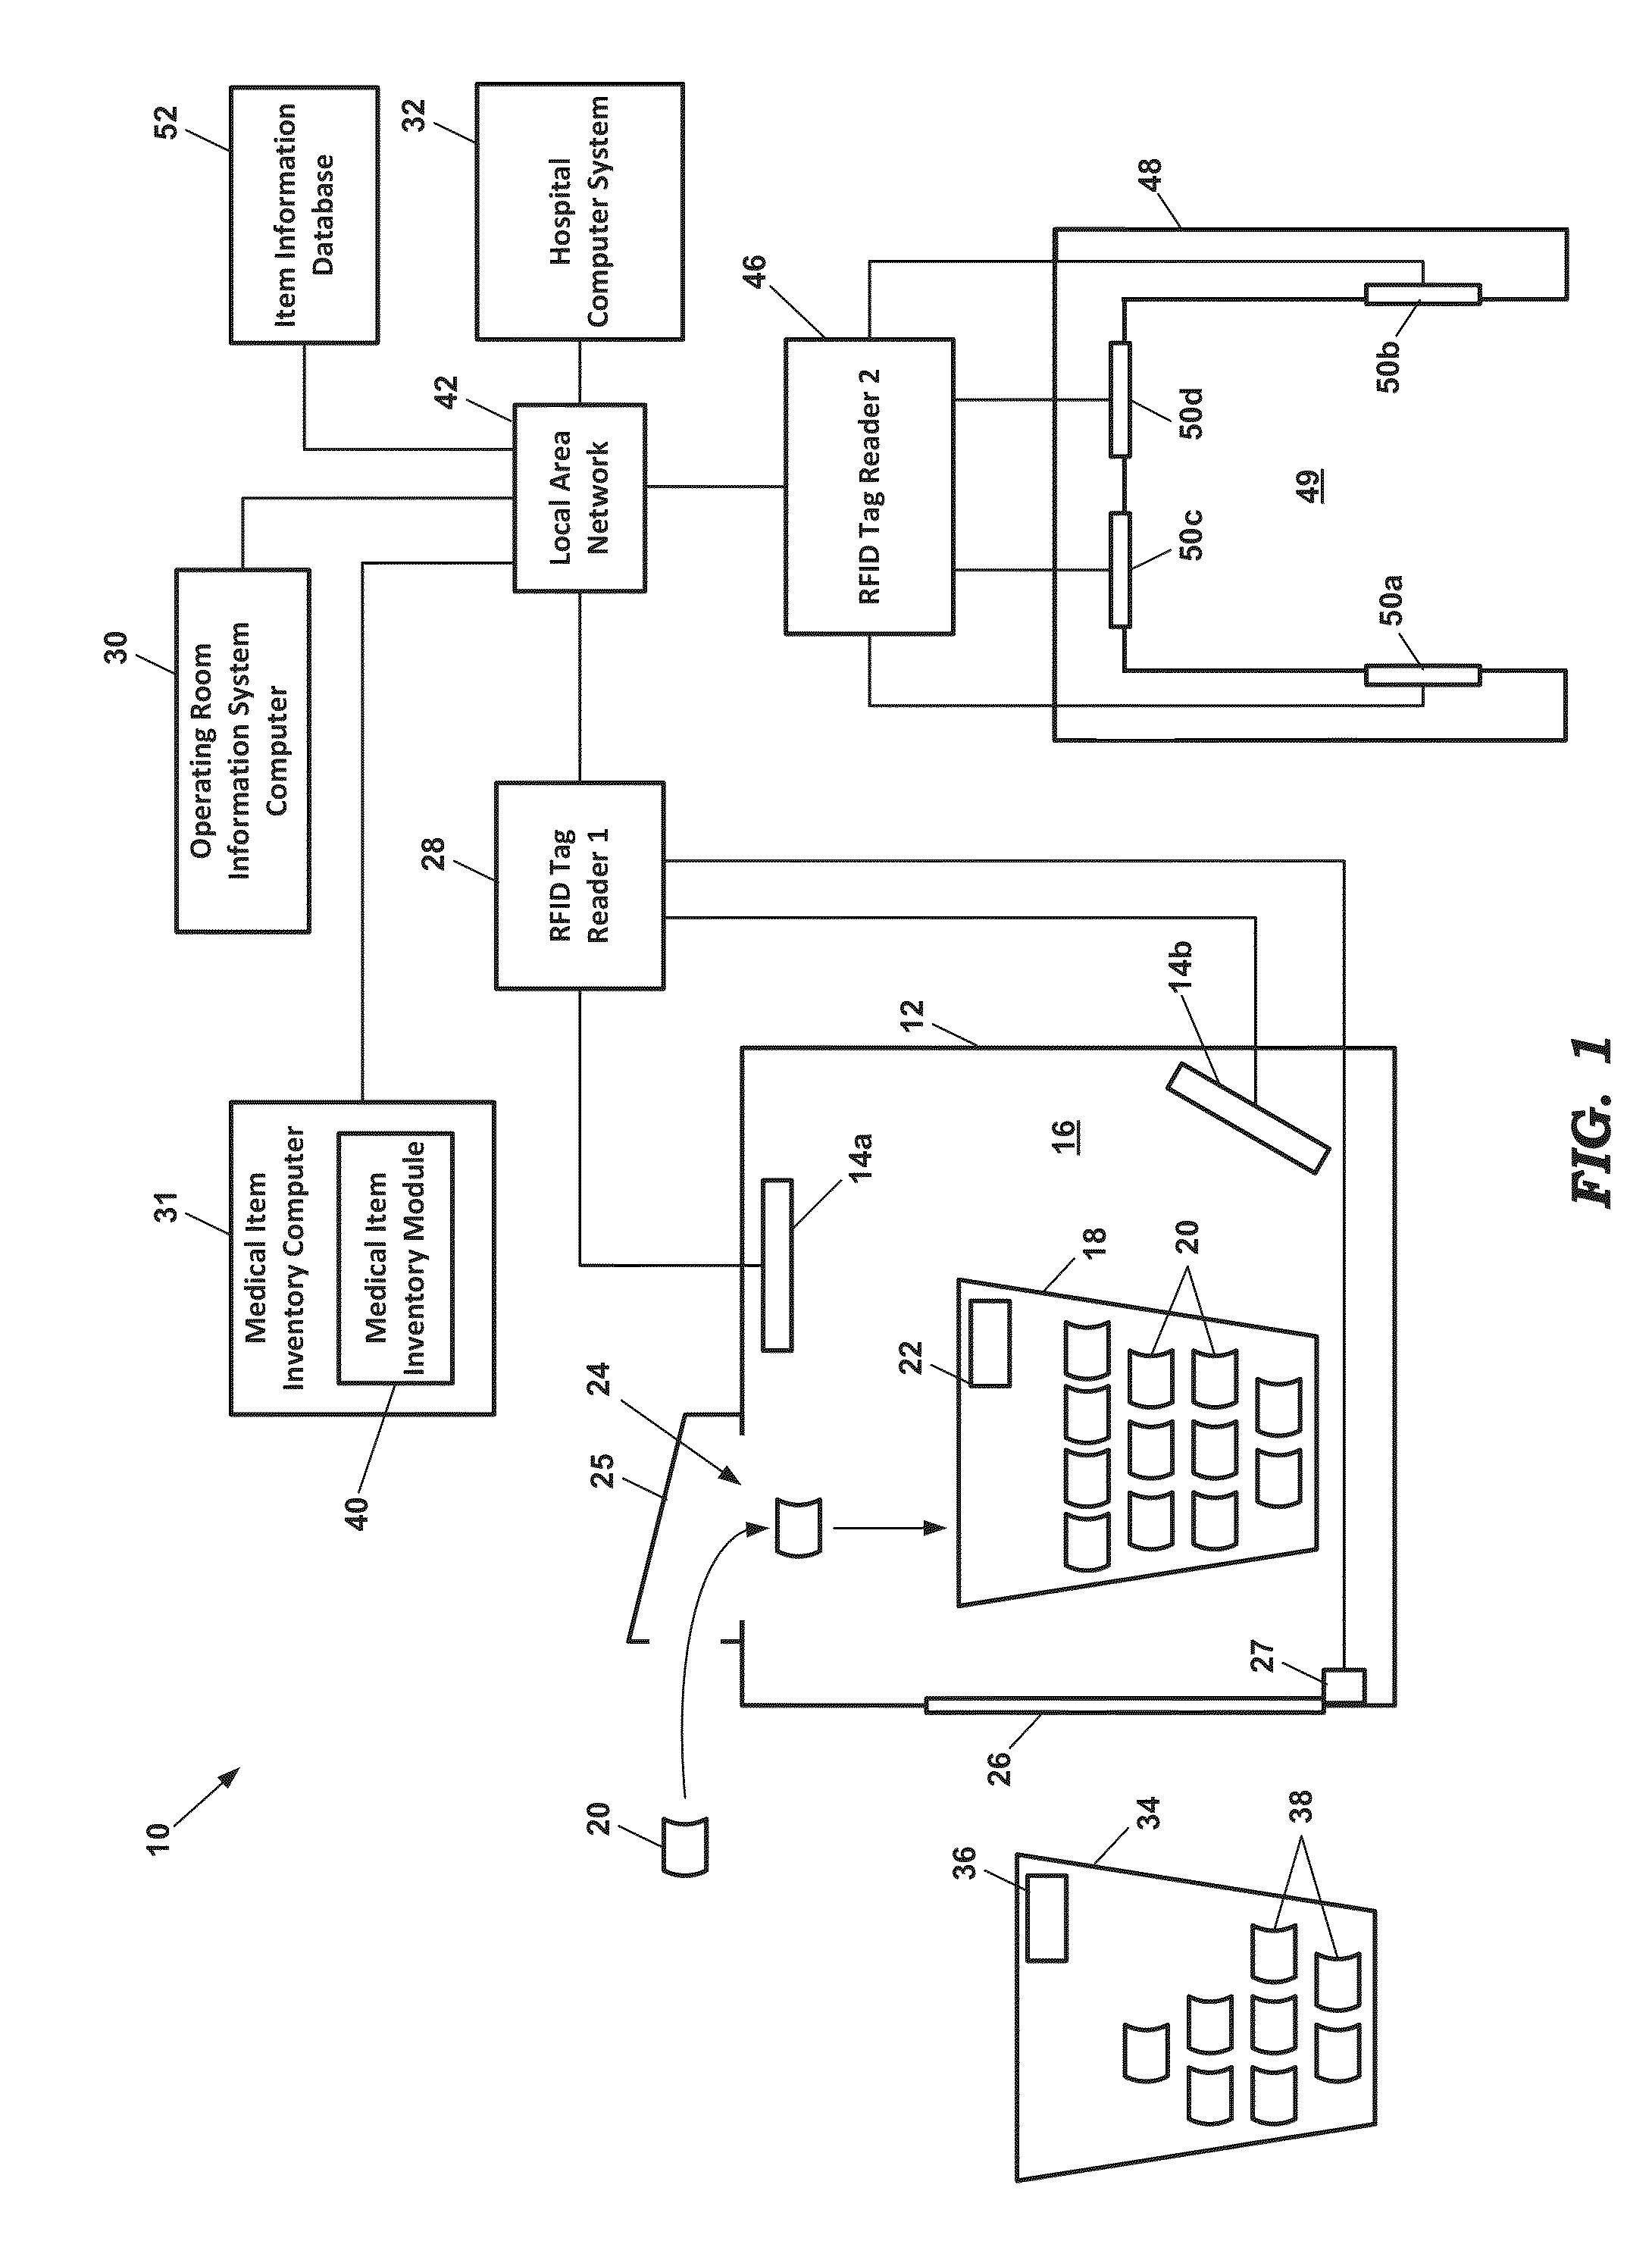 System for Sensing and Recording Consumption of Medical Items During Medical Procedure